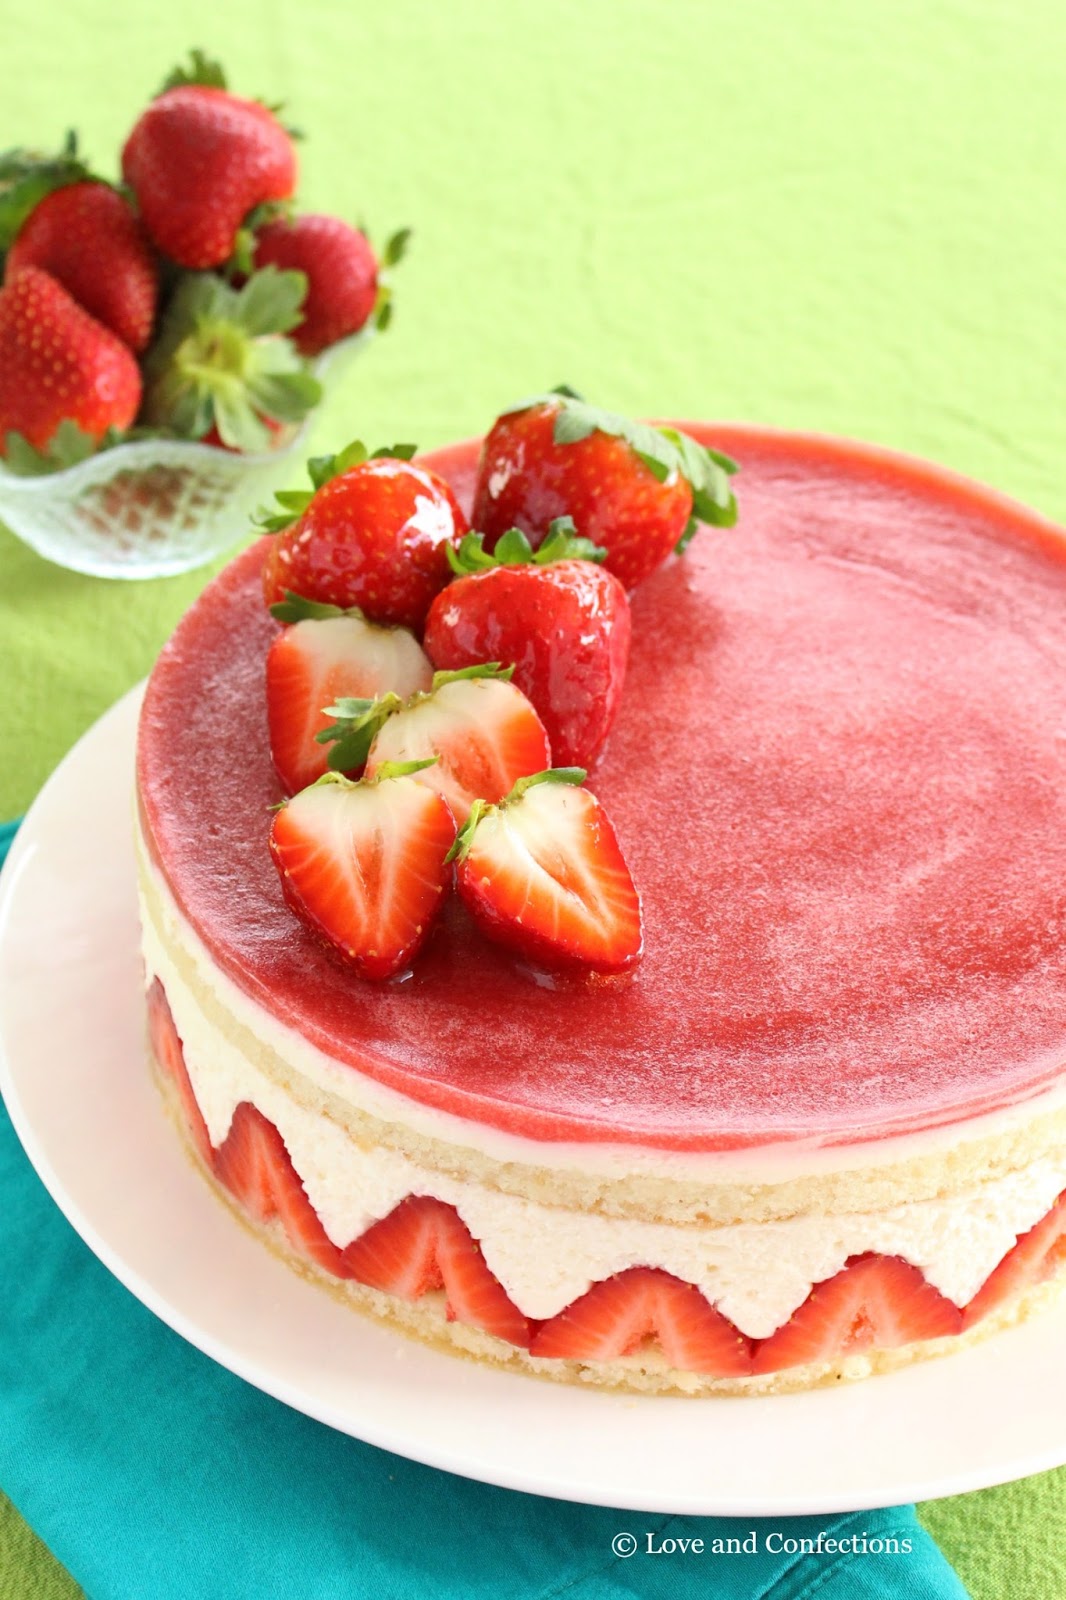 Love and Confections: Strawberry Fraisier